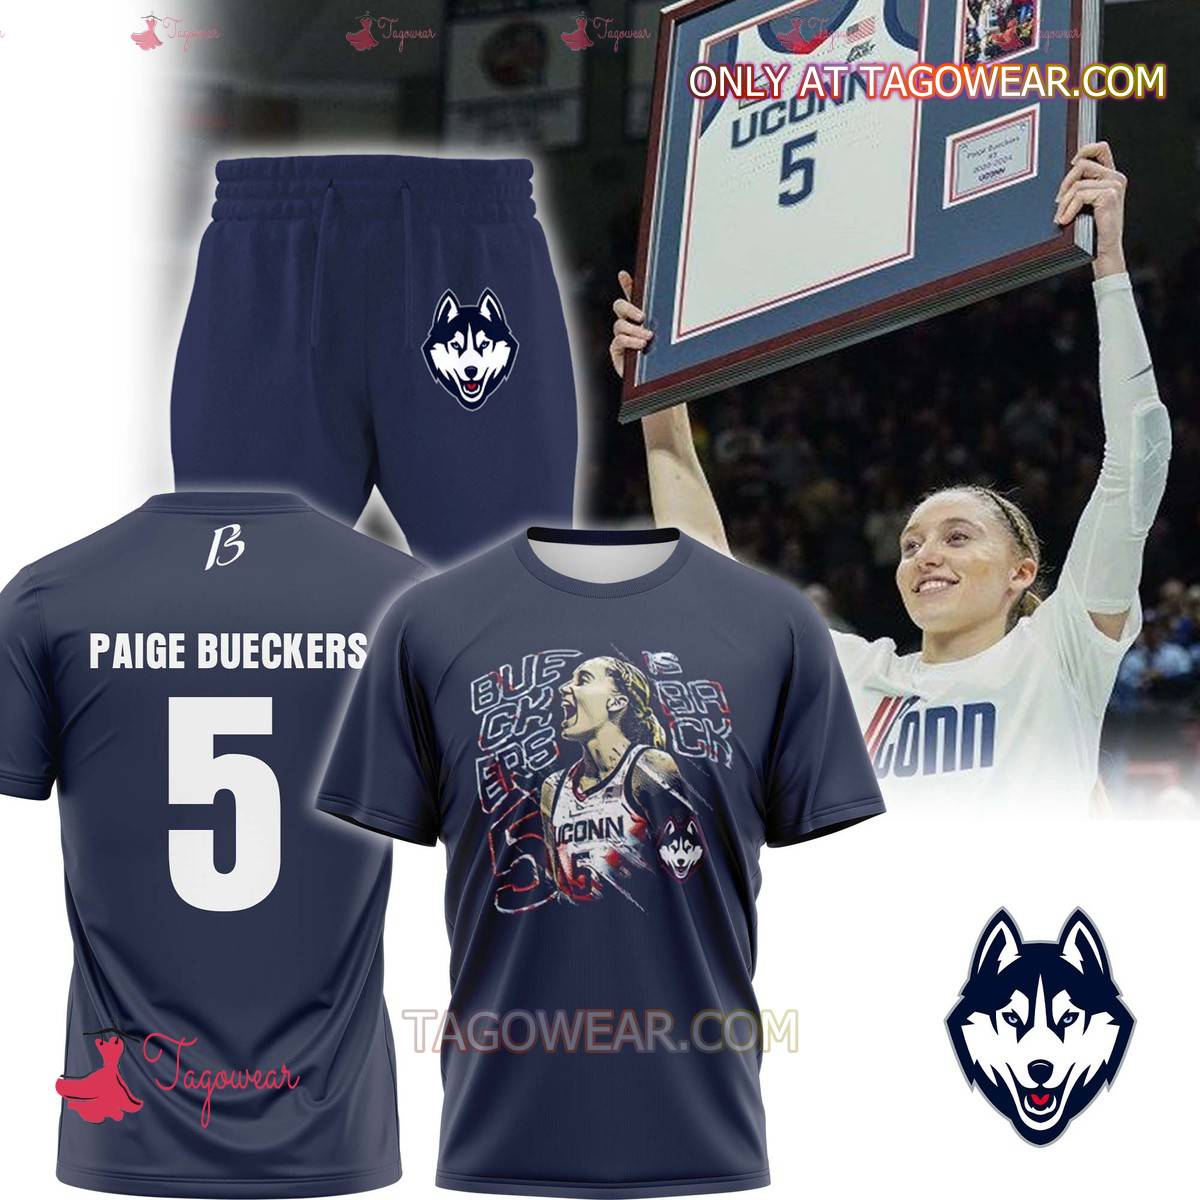 Paige Bueckers 5 Bueckers Is Back Uconn Huskies Shirt